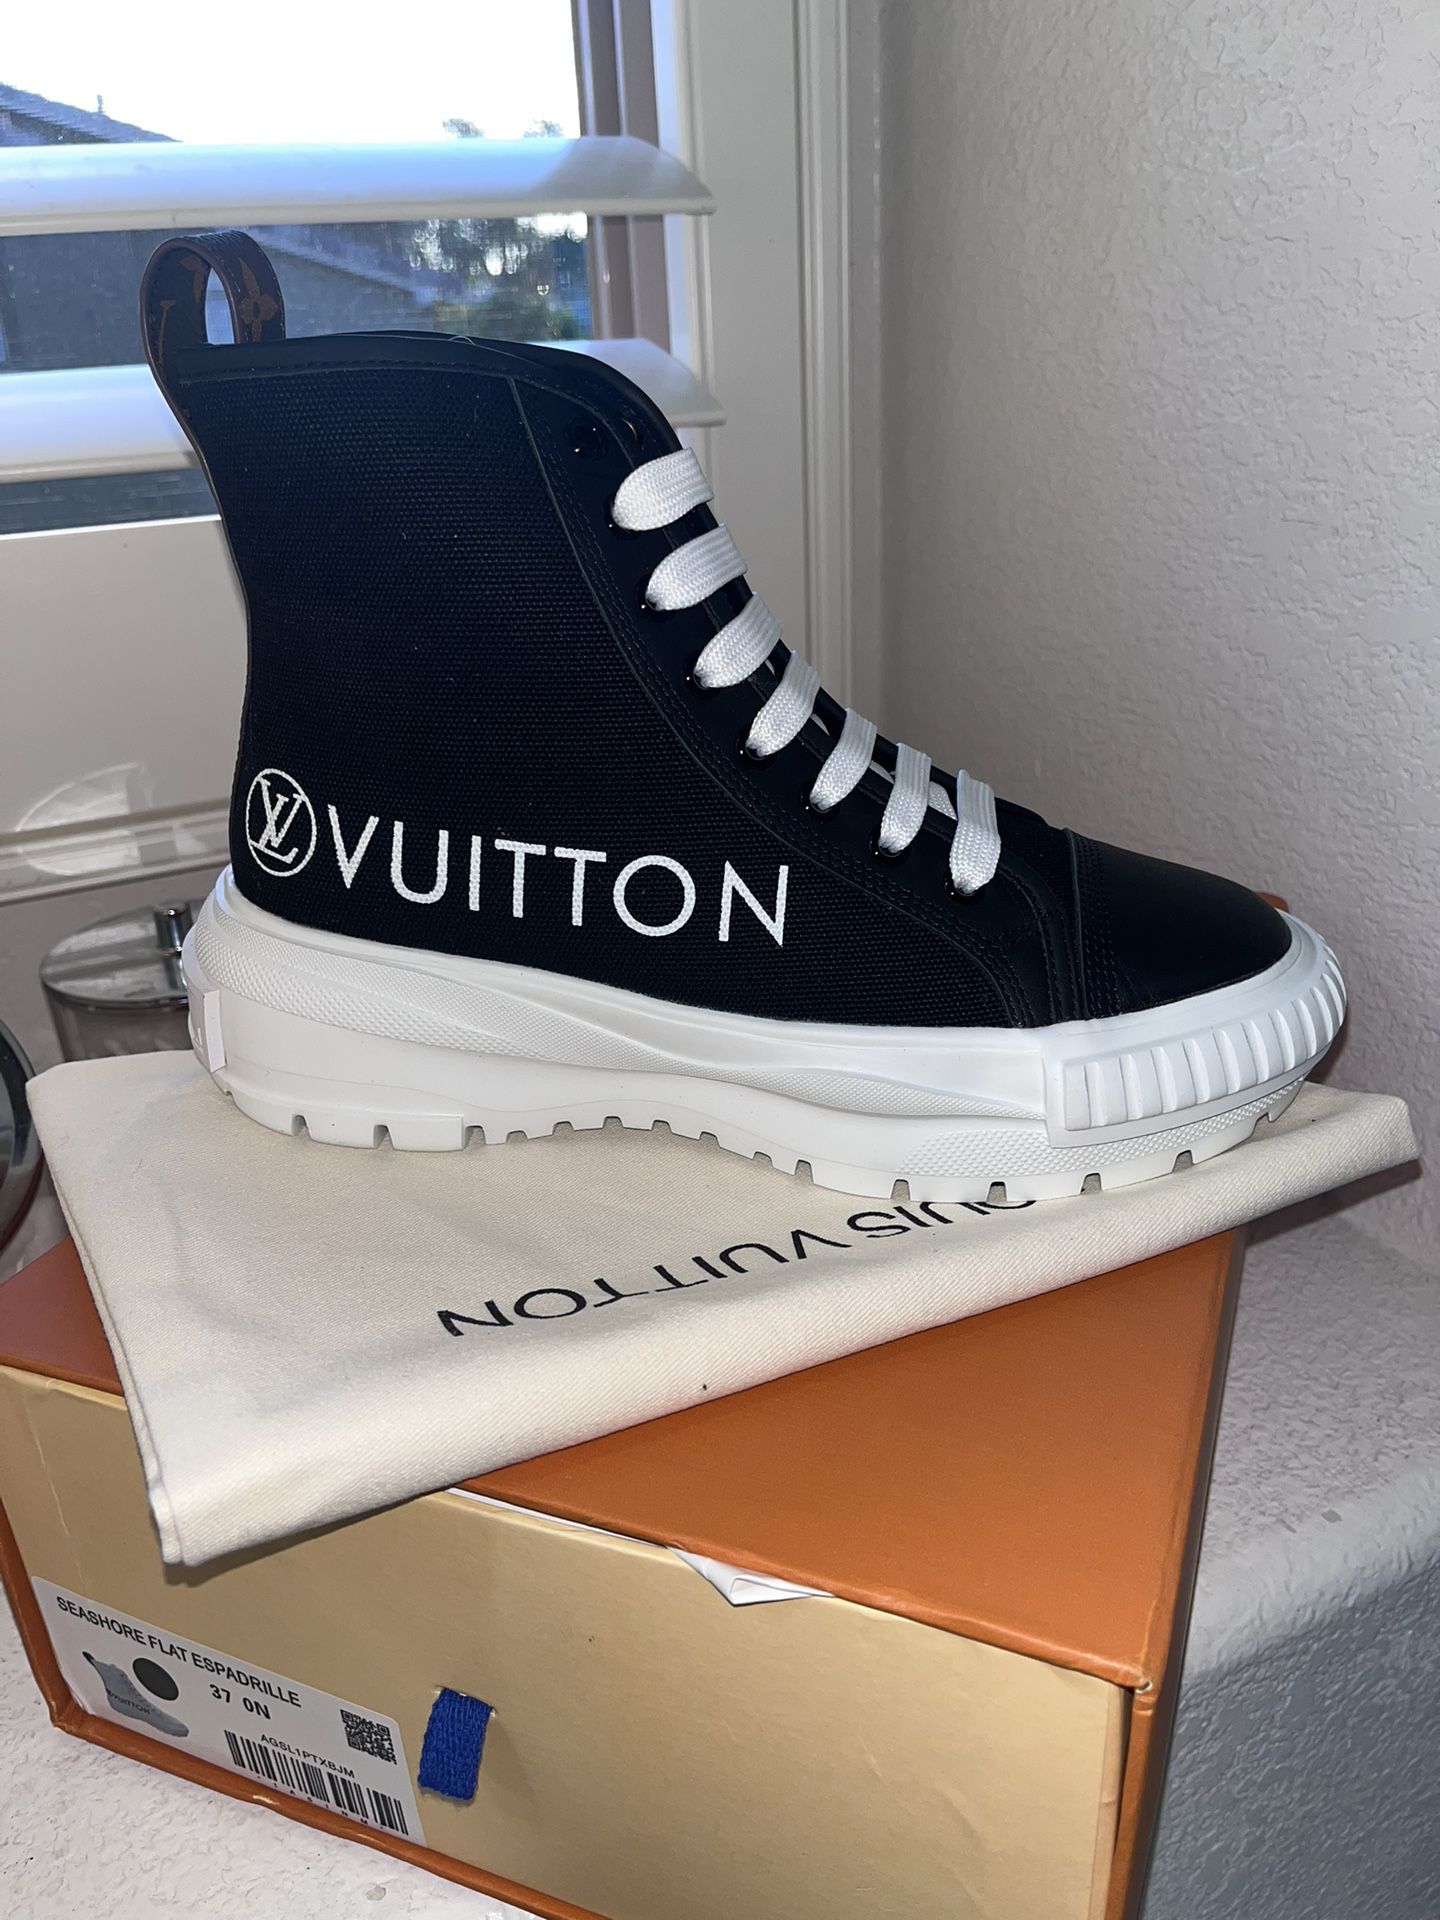 Pink Rose Louis Vuitton Trainers for Sale in Los Angeles, CA - OfferUp